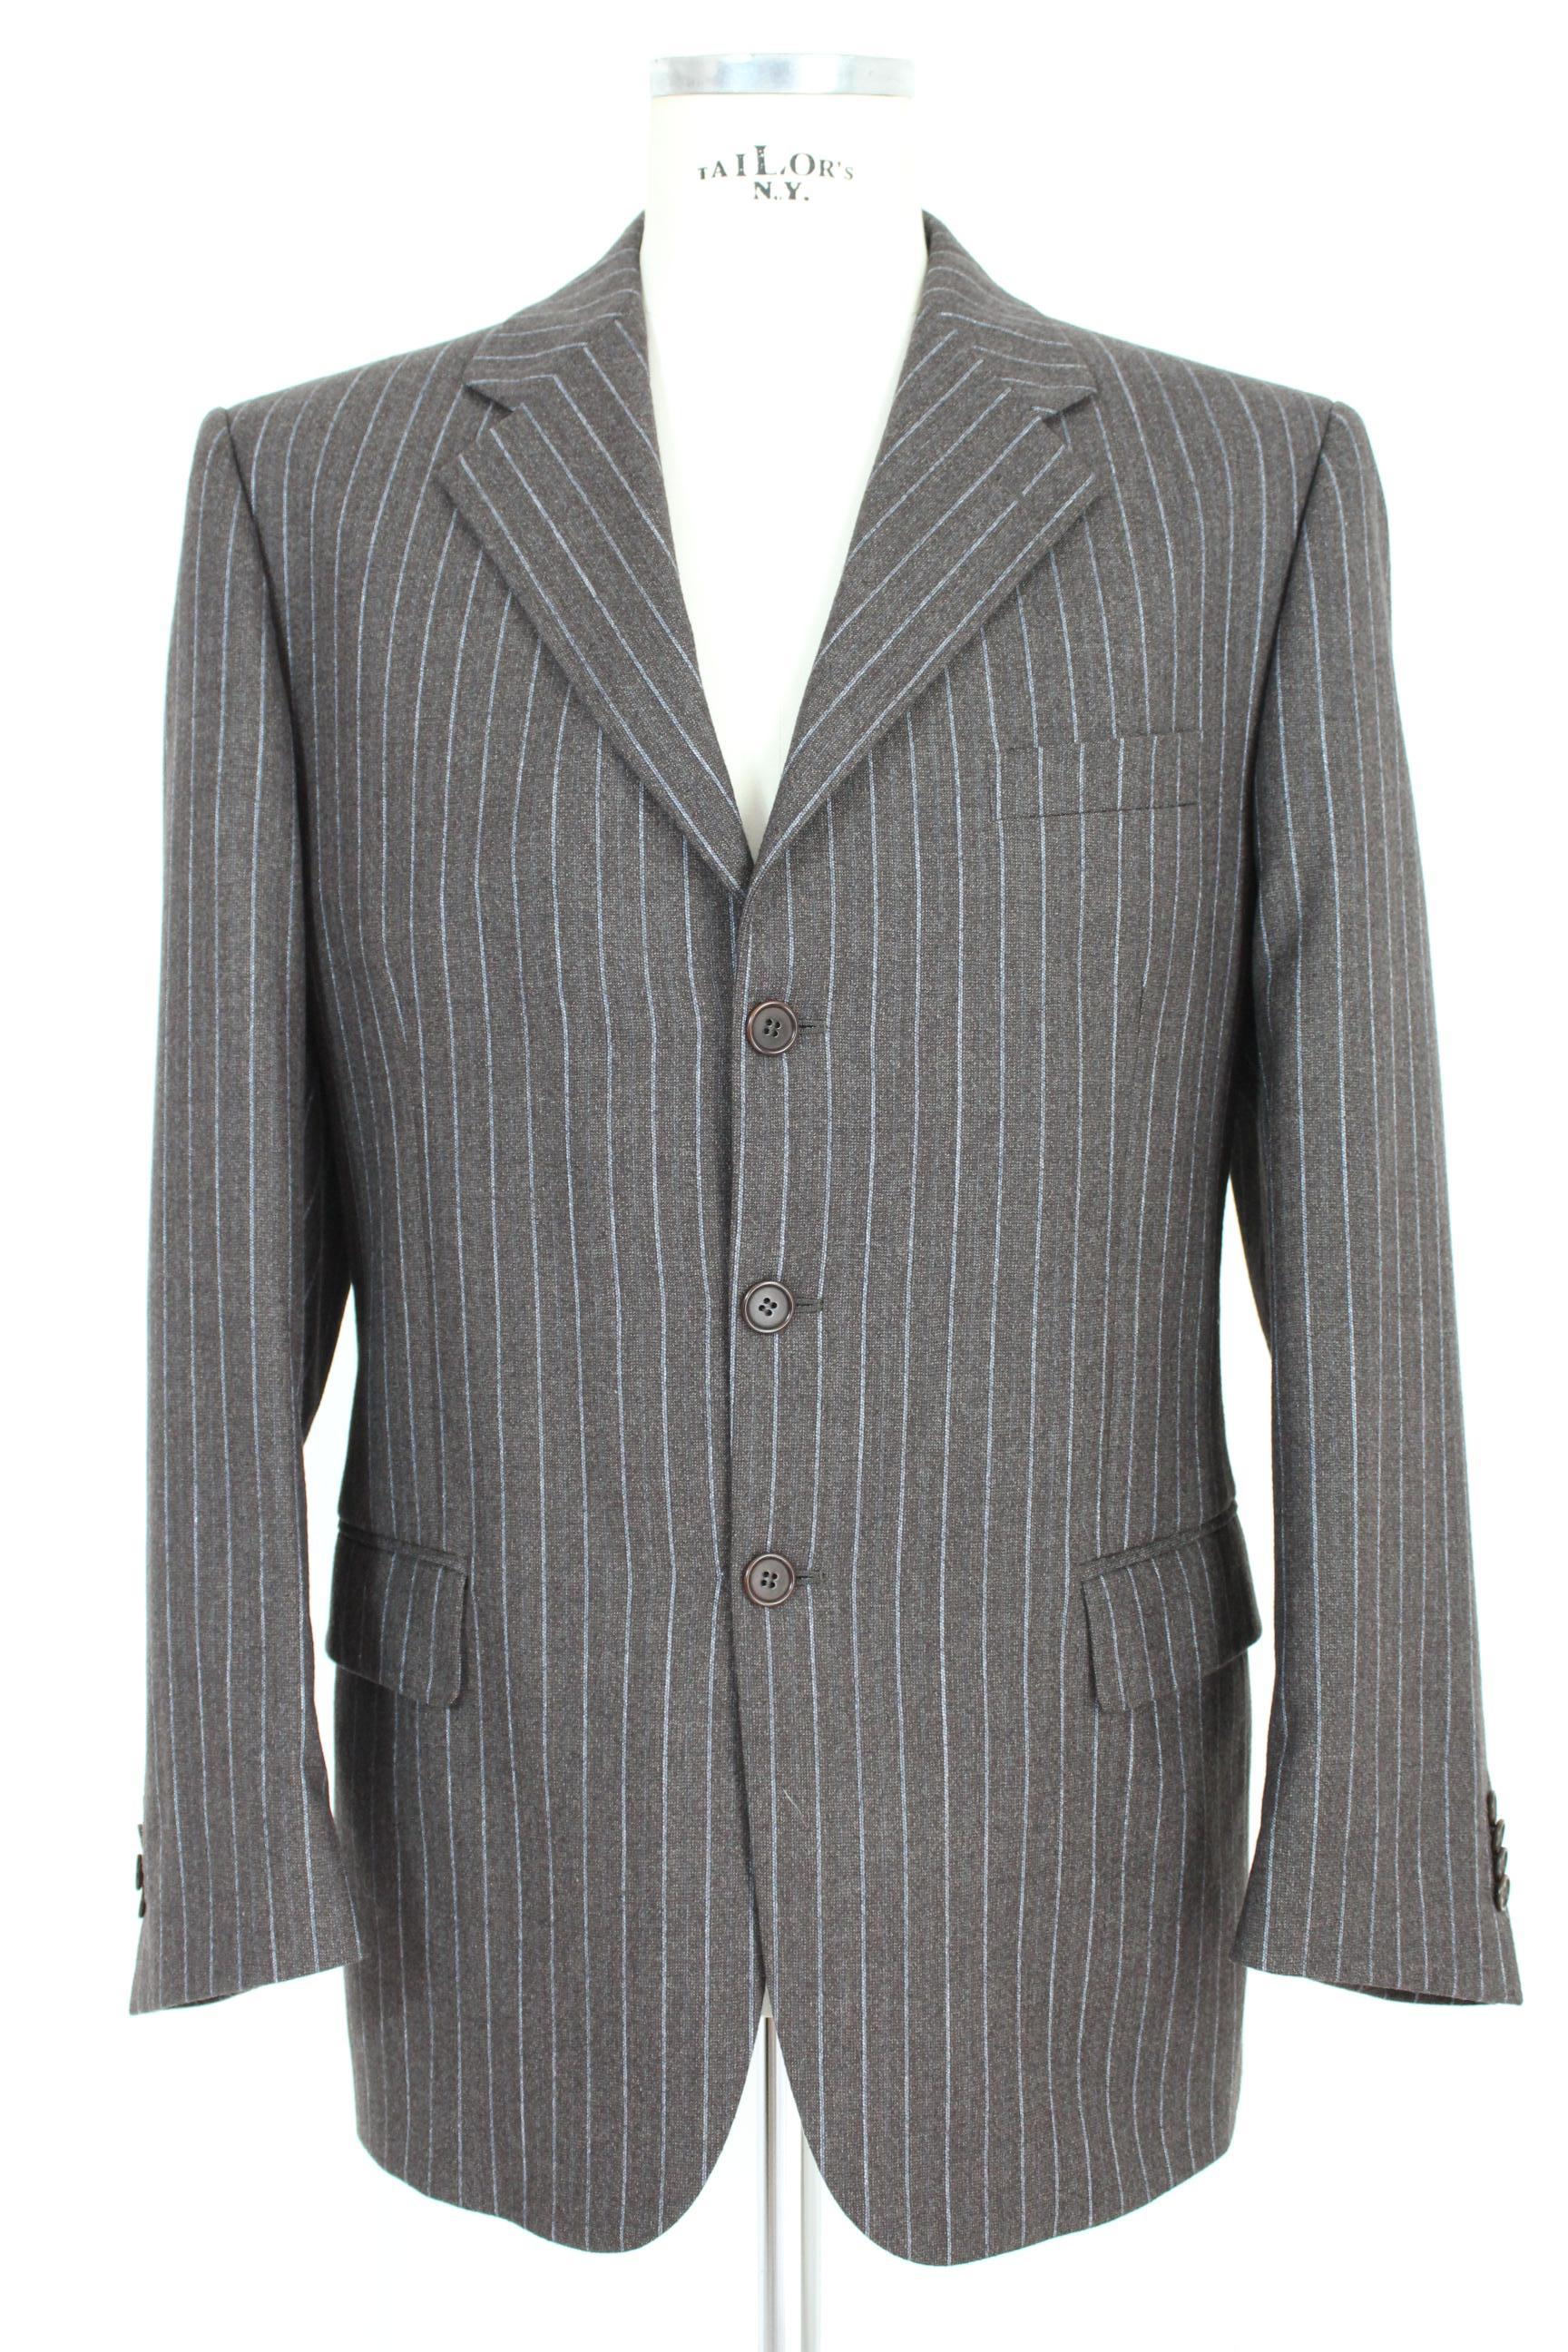 Roberto Capucci classic 90s vintage men's pants suit . Jacket and pinstriped trousers , color brown and light blue. 100% wool . Made in Italy. Excellent vintage condition.

Size: 52 It 42 Us 42 Uk

Shoulder: 52 cm 
Chest / Chest: 58 cm 
Sleeve: 64